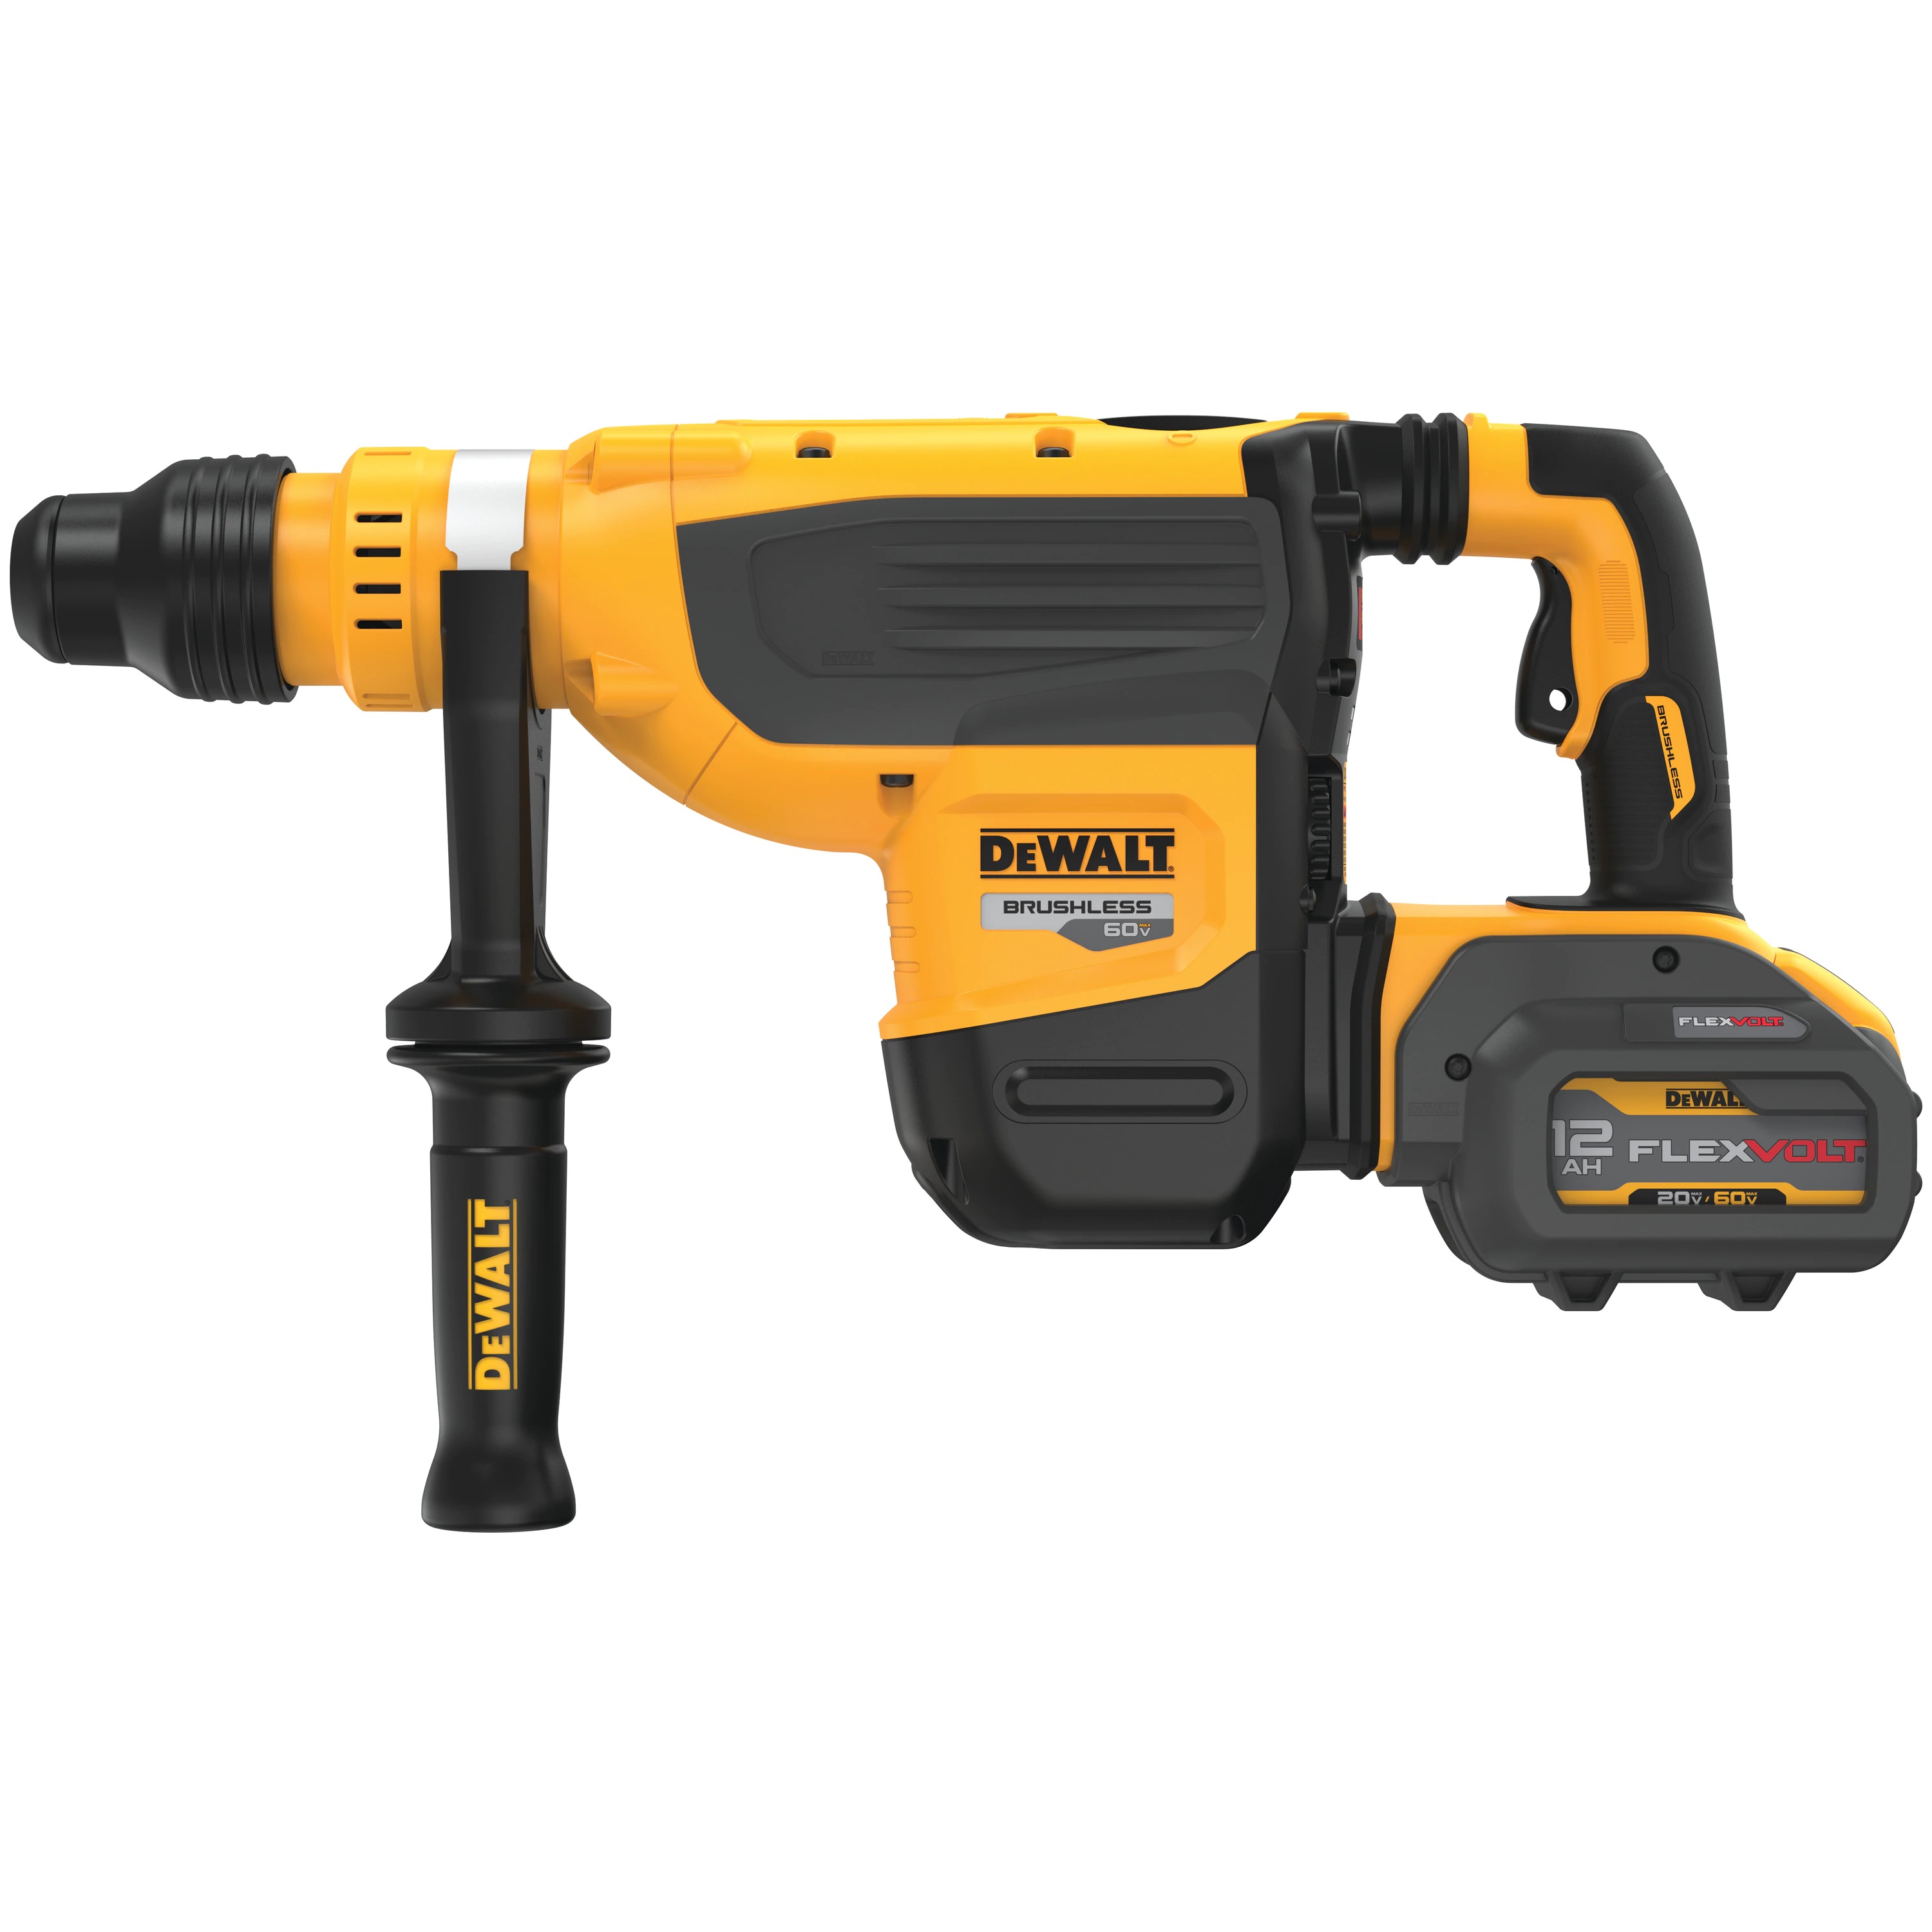 Hammer Drill - 60V MAX* 1-7/8 IN. Brushless Cordless SDS Max (TOOL ONLY) - Rotary & Demolition Hammer Drills